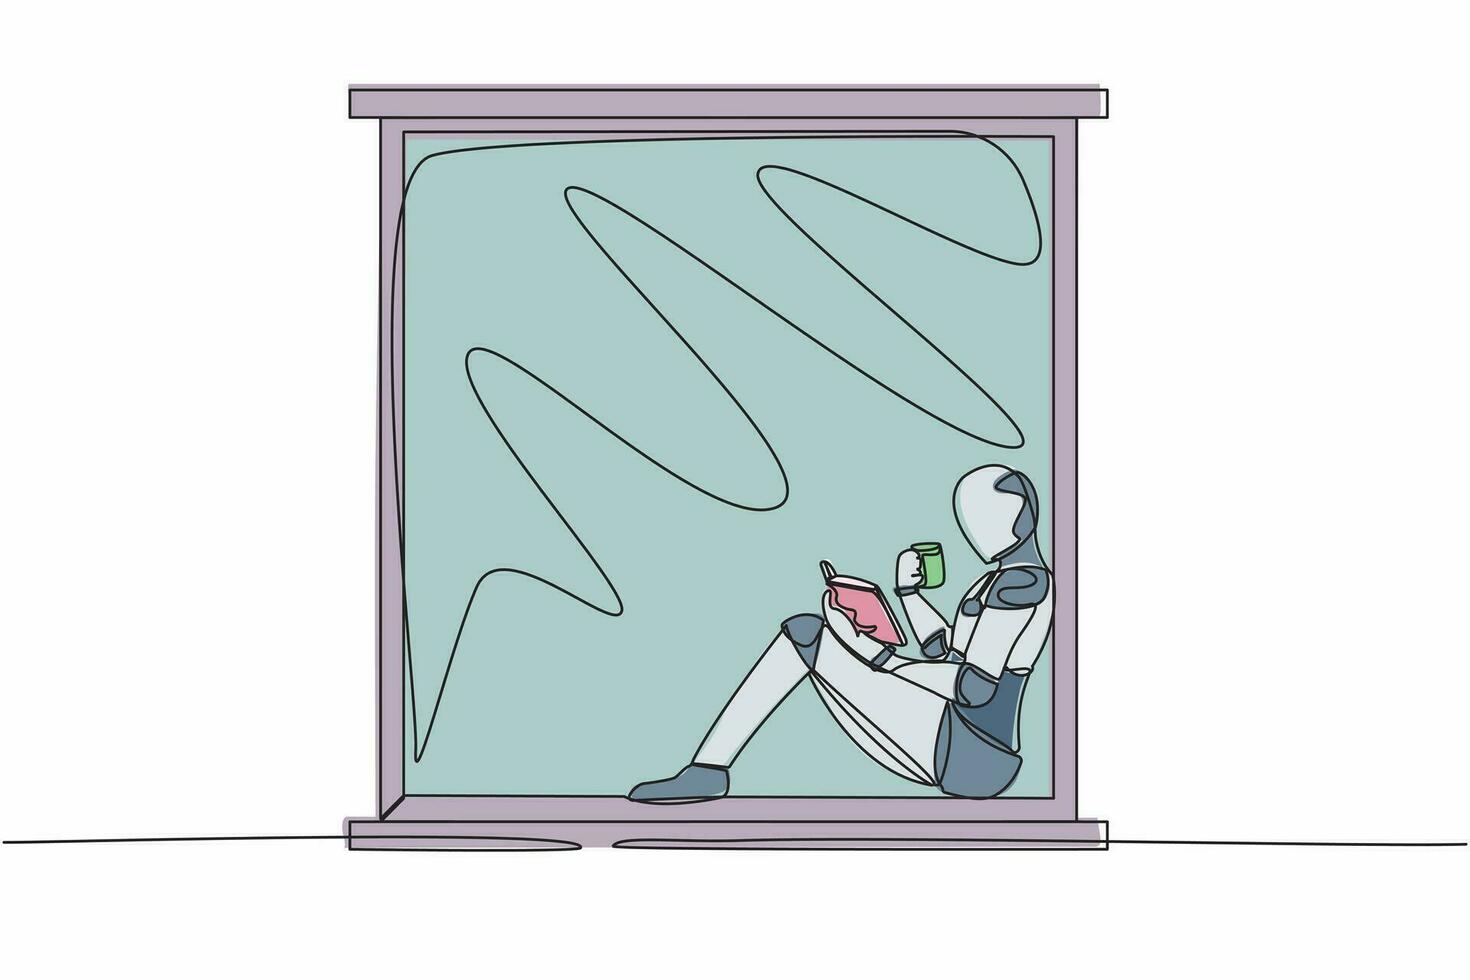 Continuous one line drawing robot on windowsill with cup of hot coffee or tea, reading book. Enjoying a day in window. Humanoid robot cybernetic organism. Single line draw design vector illustration